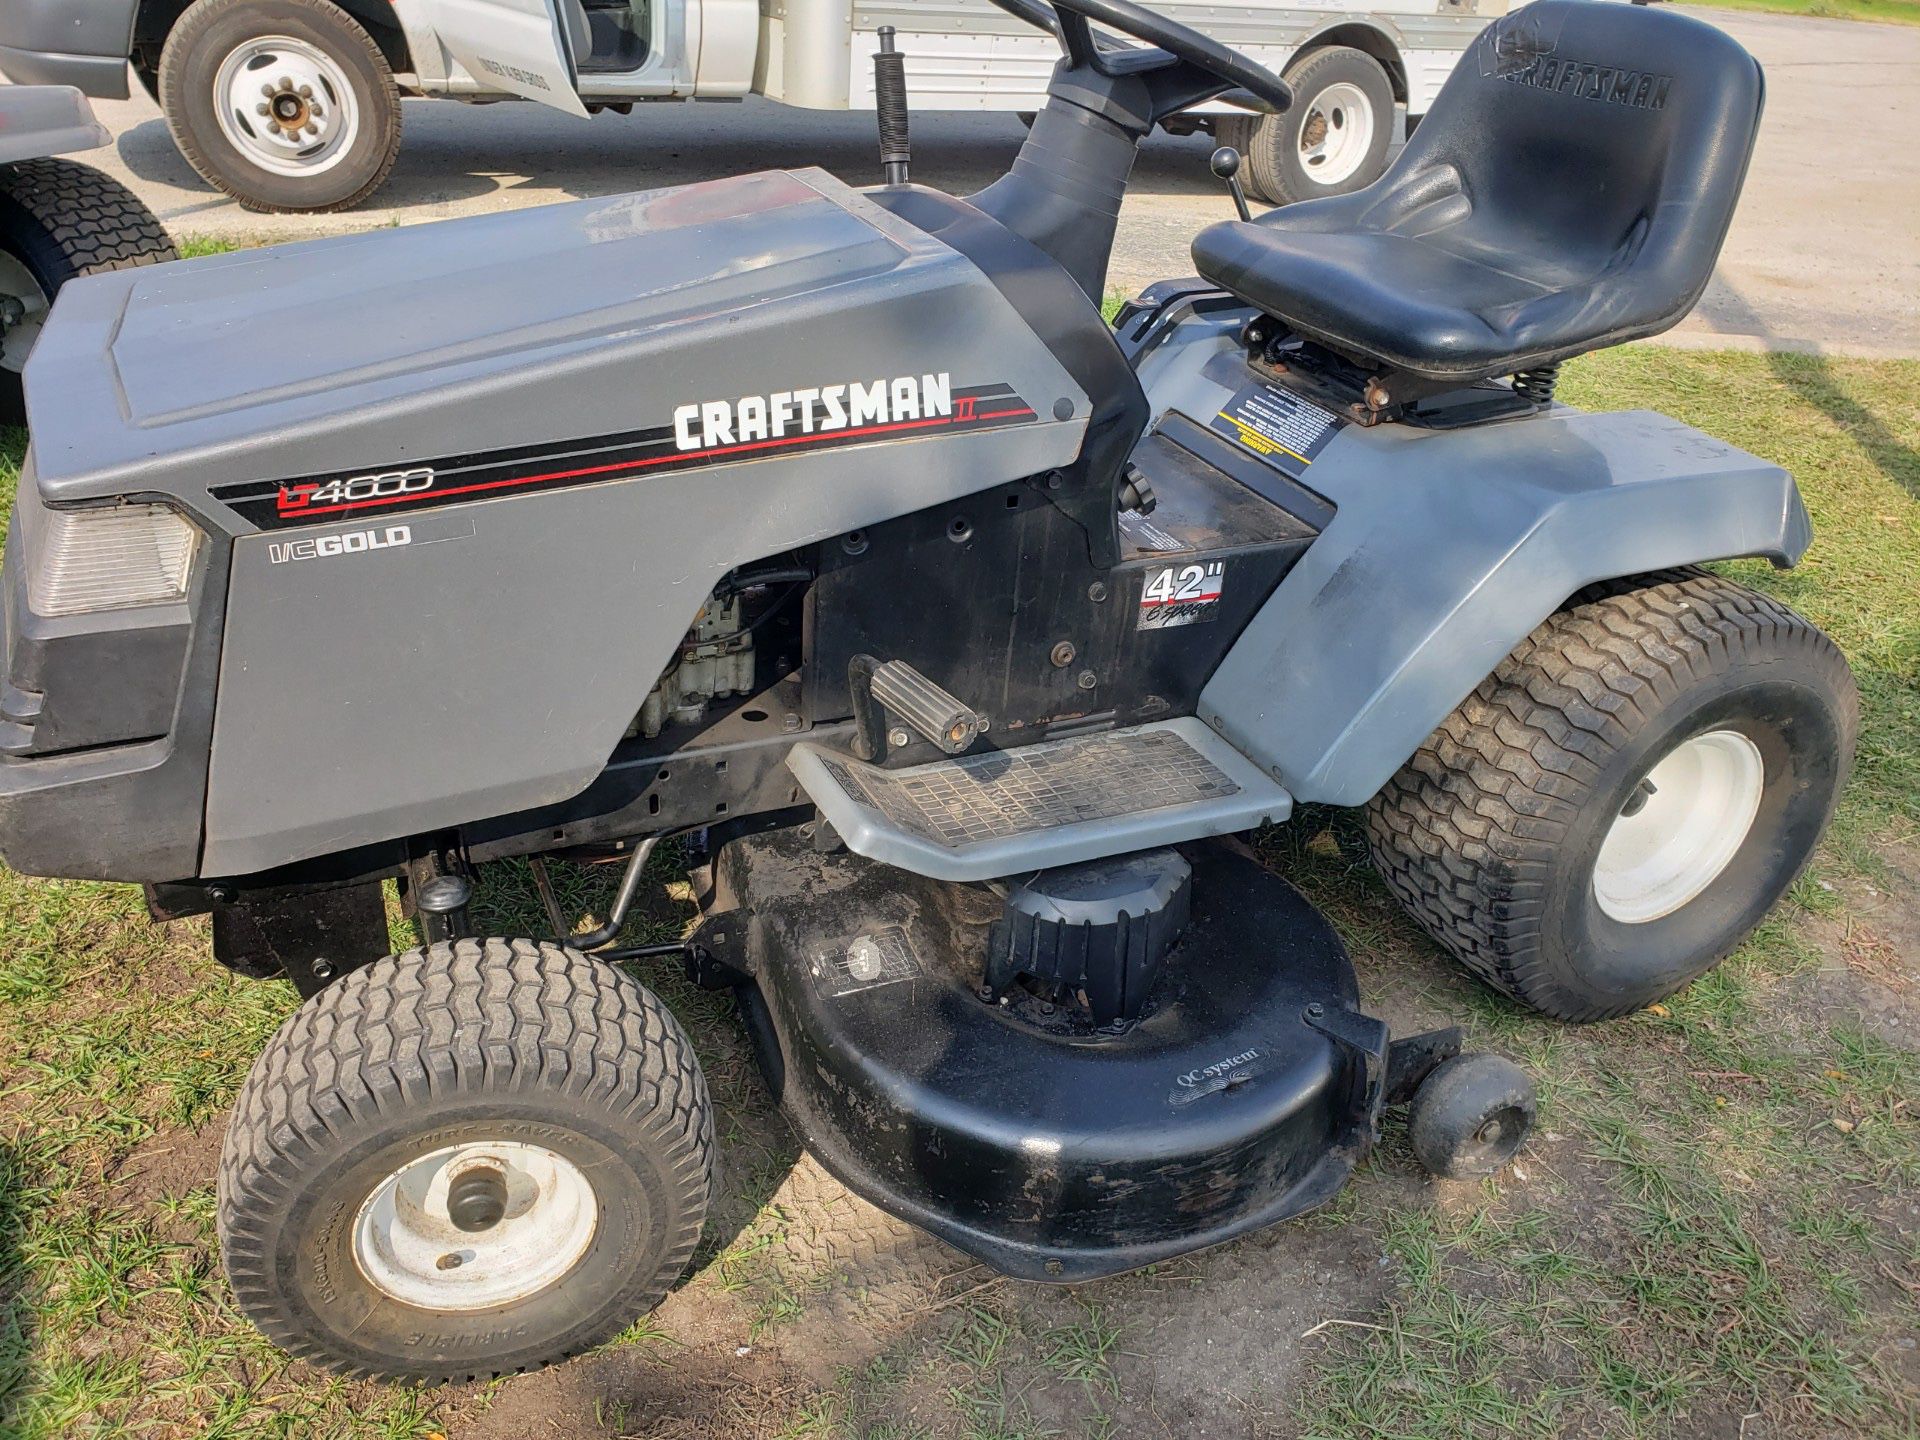 Craftsman 42inch tractor riding mower.